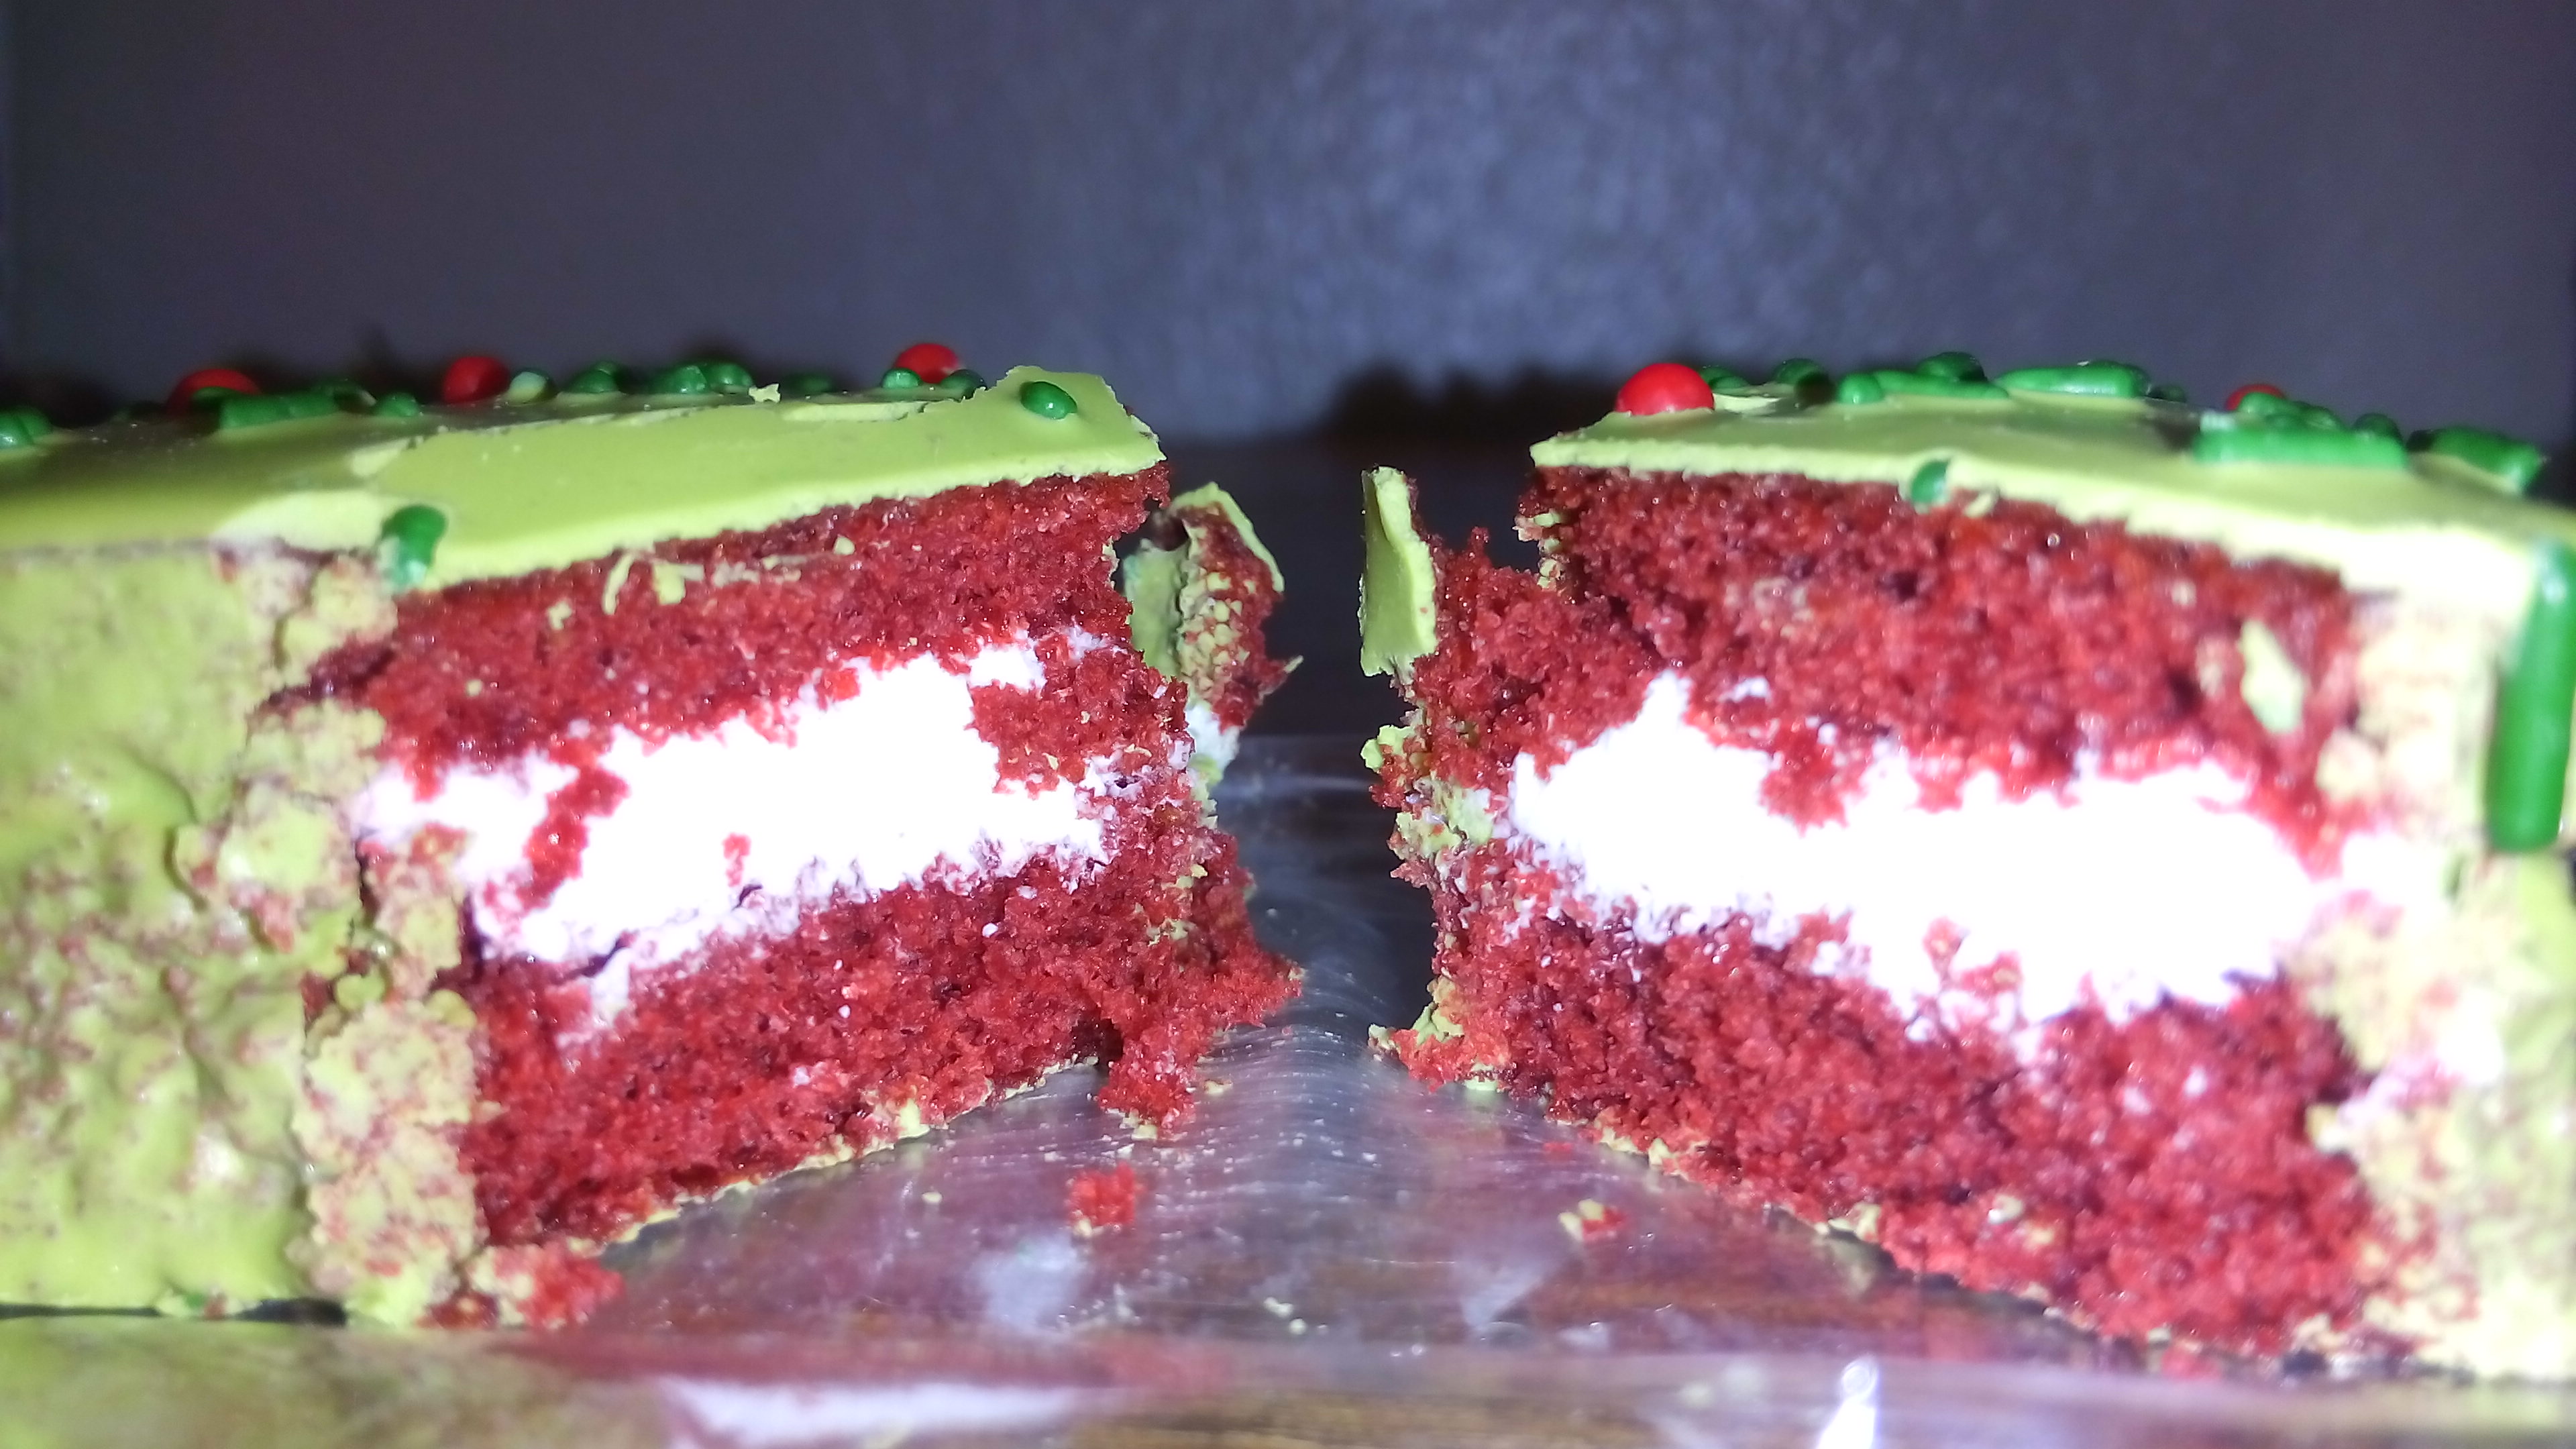 60+ Best Red Velvet Desserts Recipes - Red Velvet Cakes, Cupcakes, and  Cookies